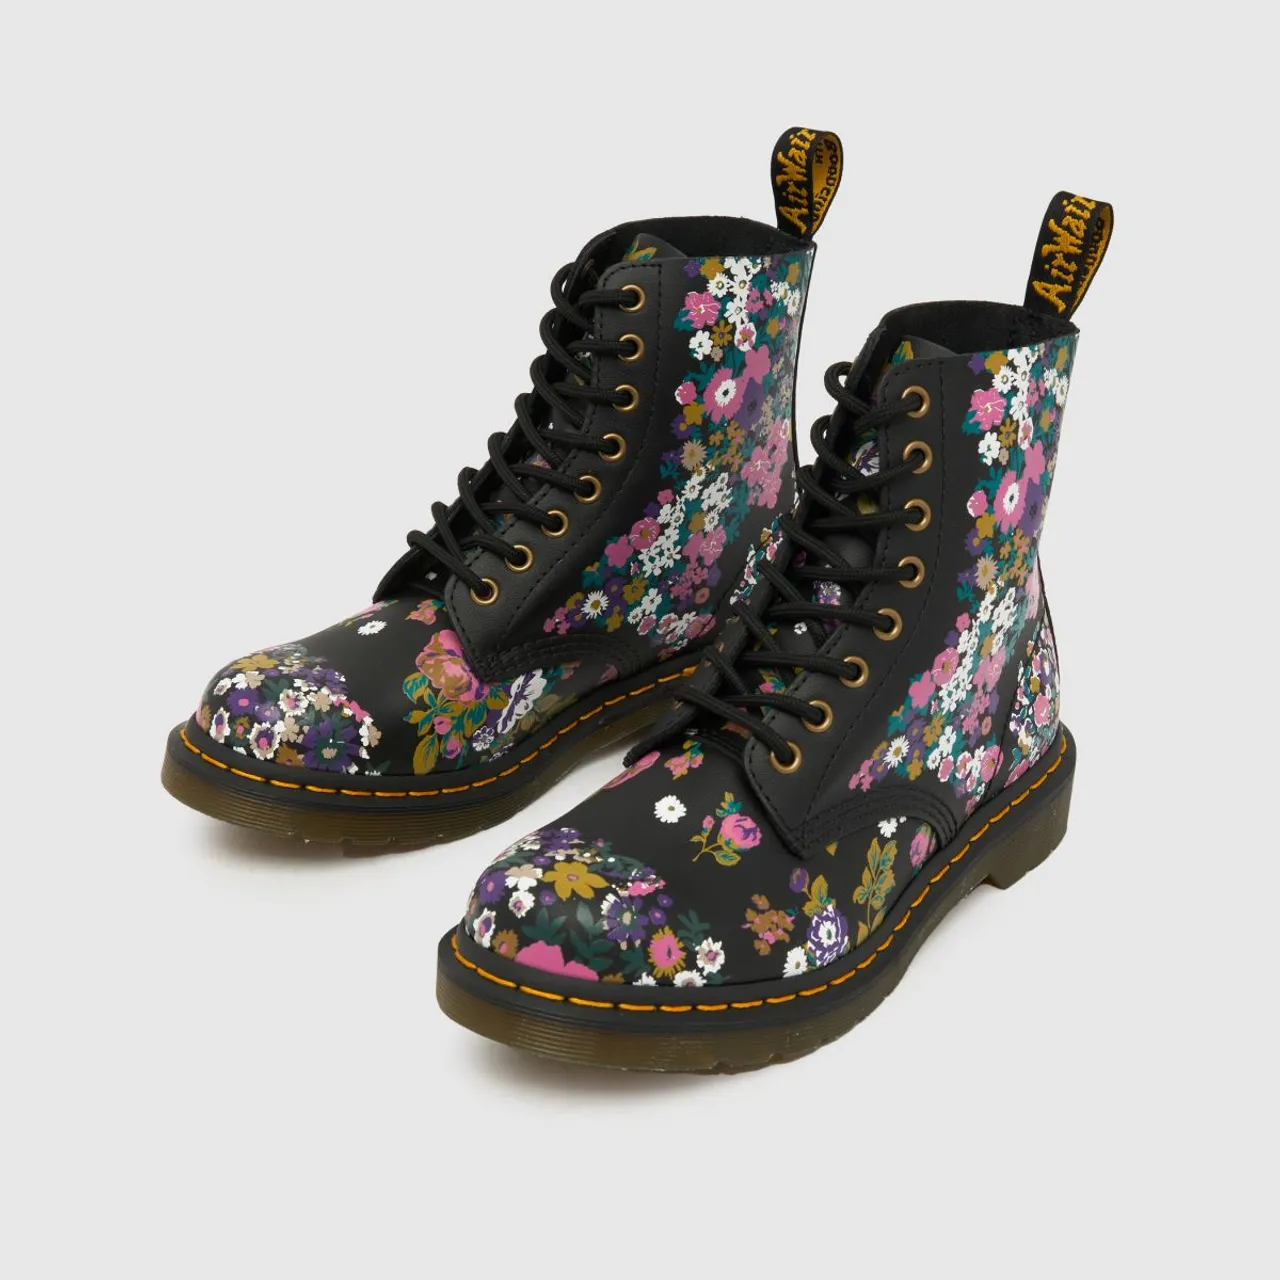 Dr. Martens Women's Black and Pink 1460 Pascal Floral Boots